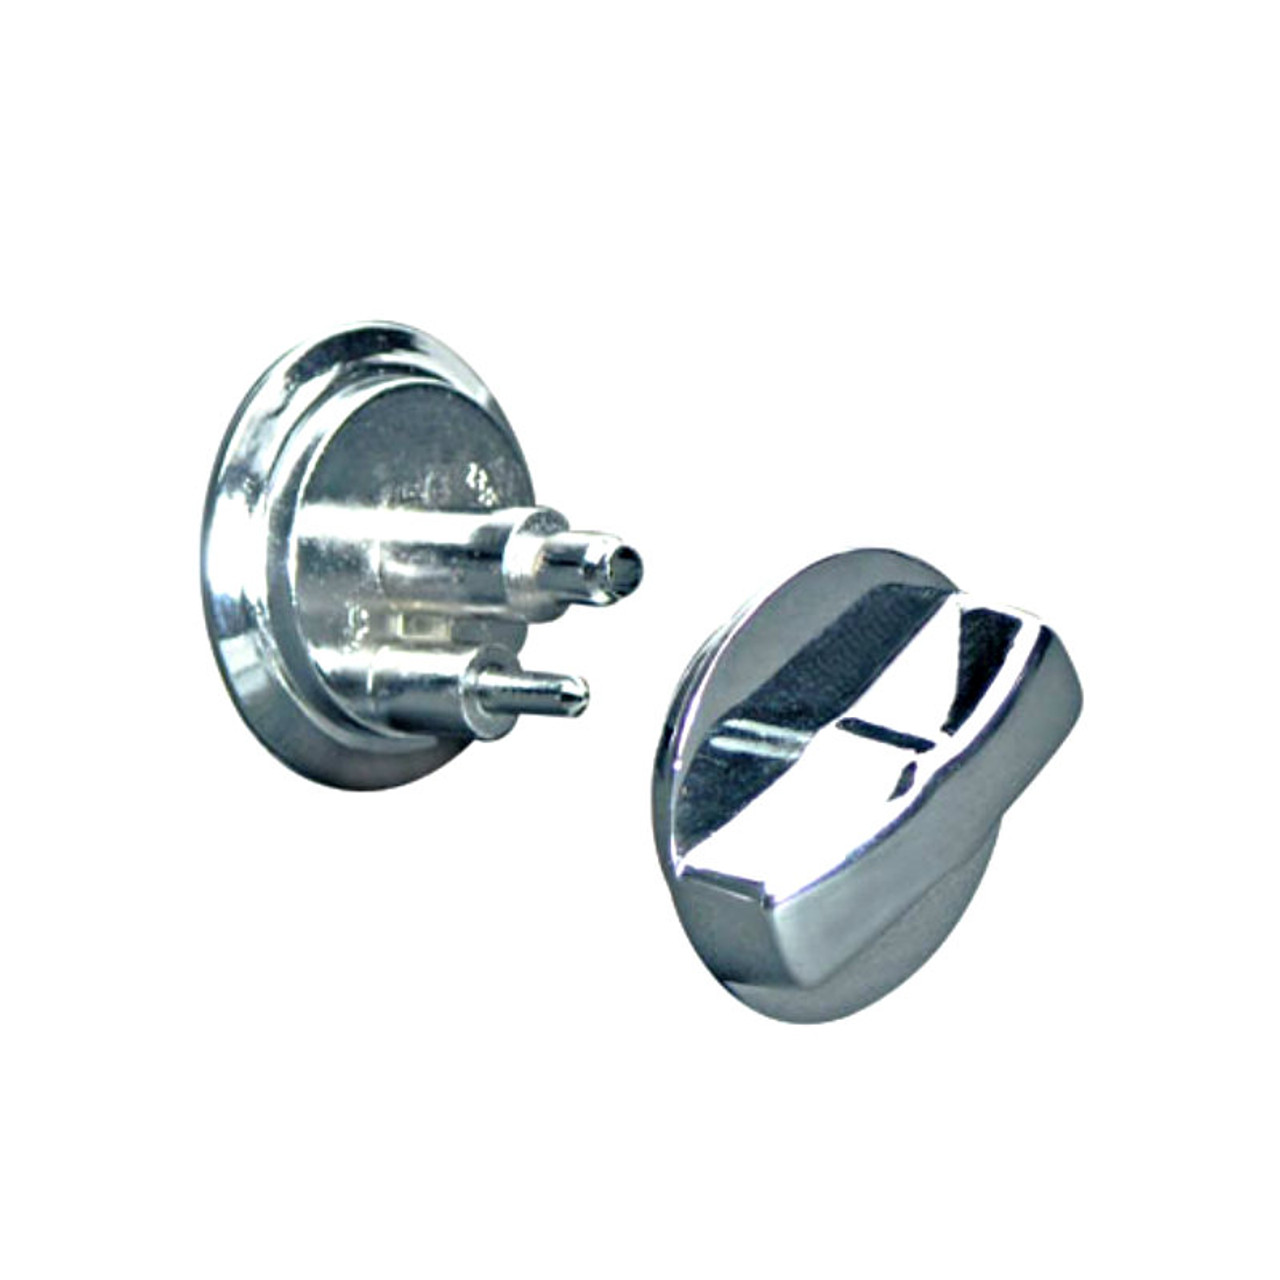 Global Partitions Zamac Twist Knob for Concealed Latch - Harbor